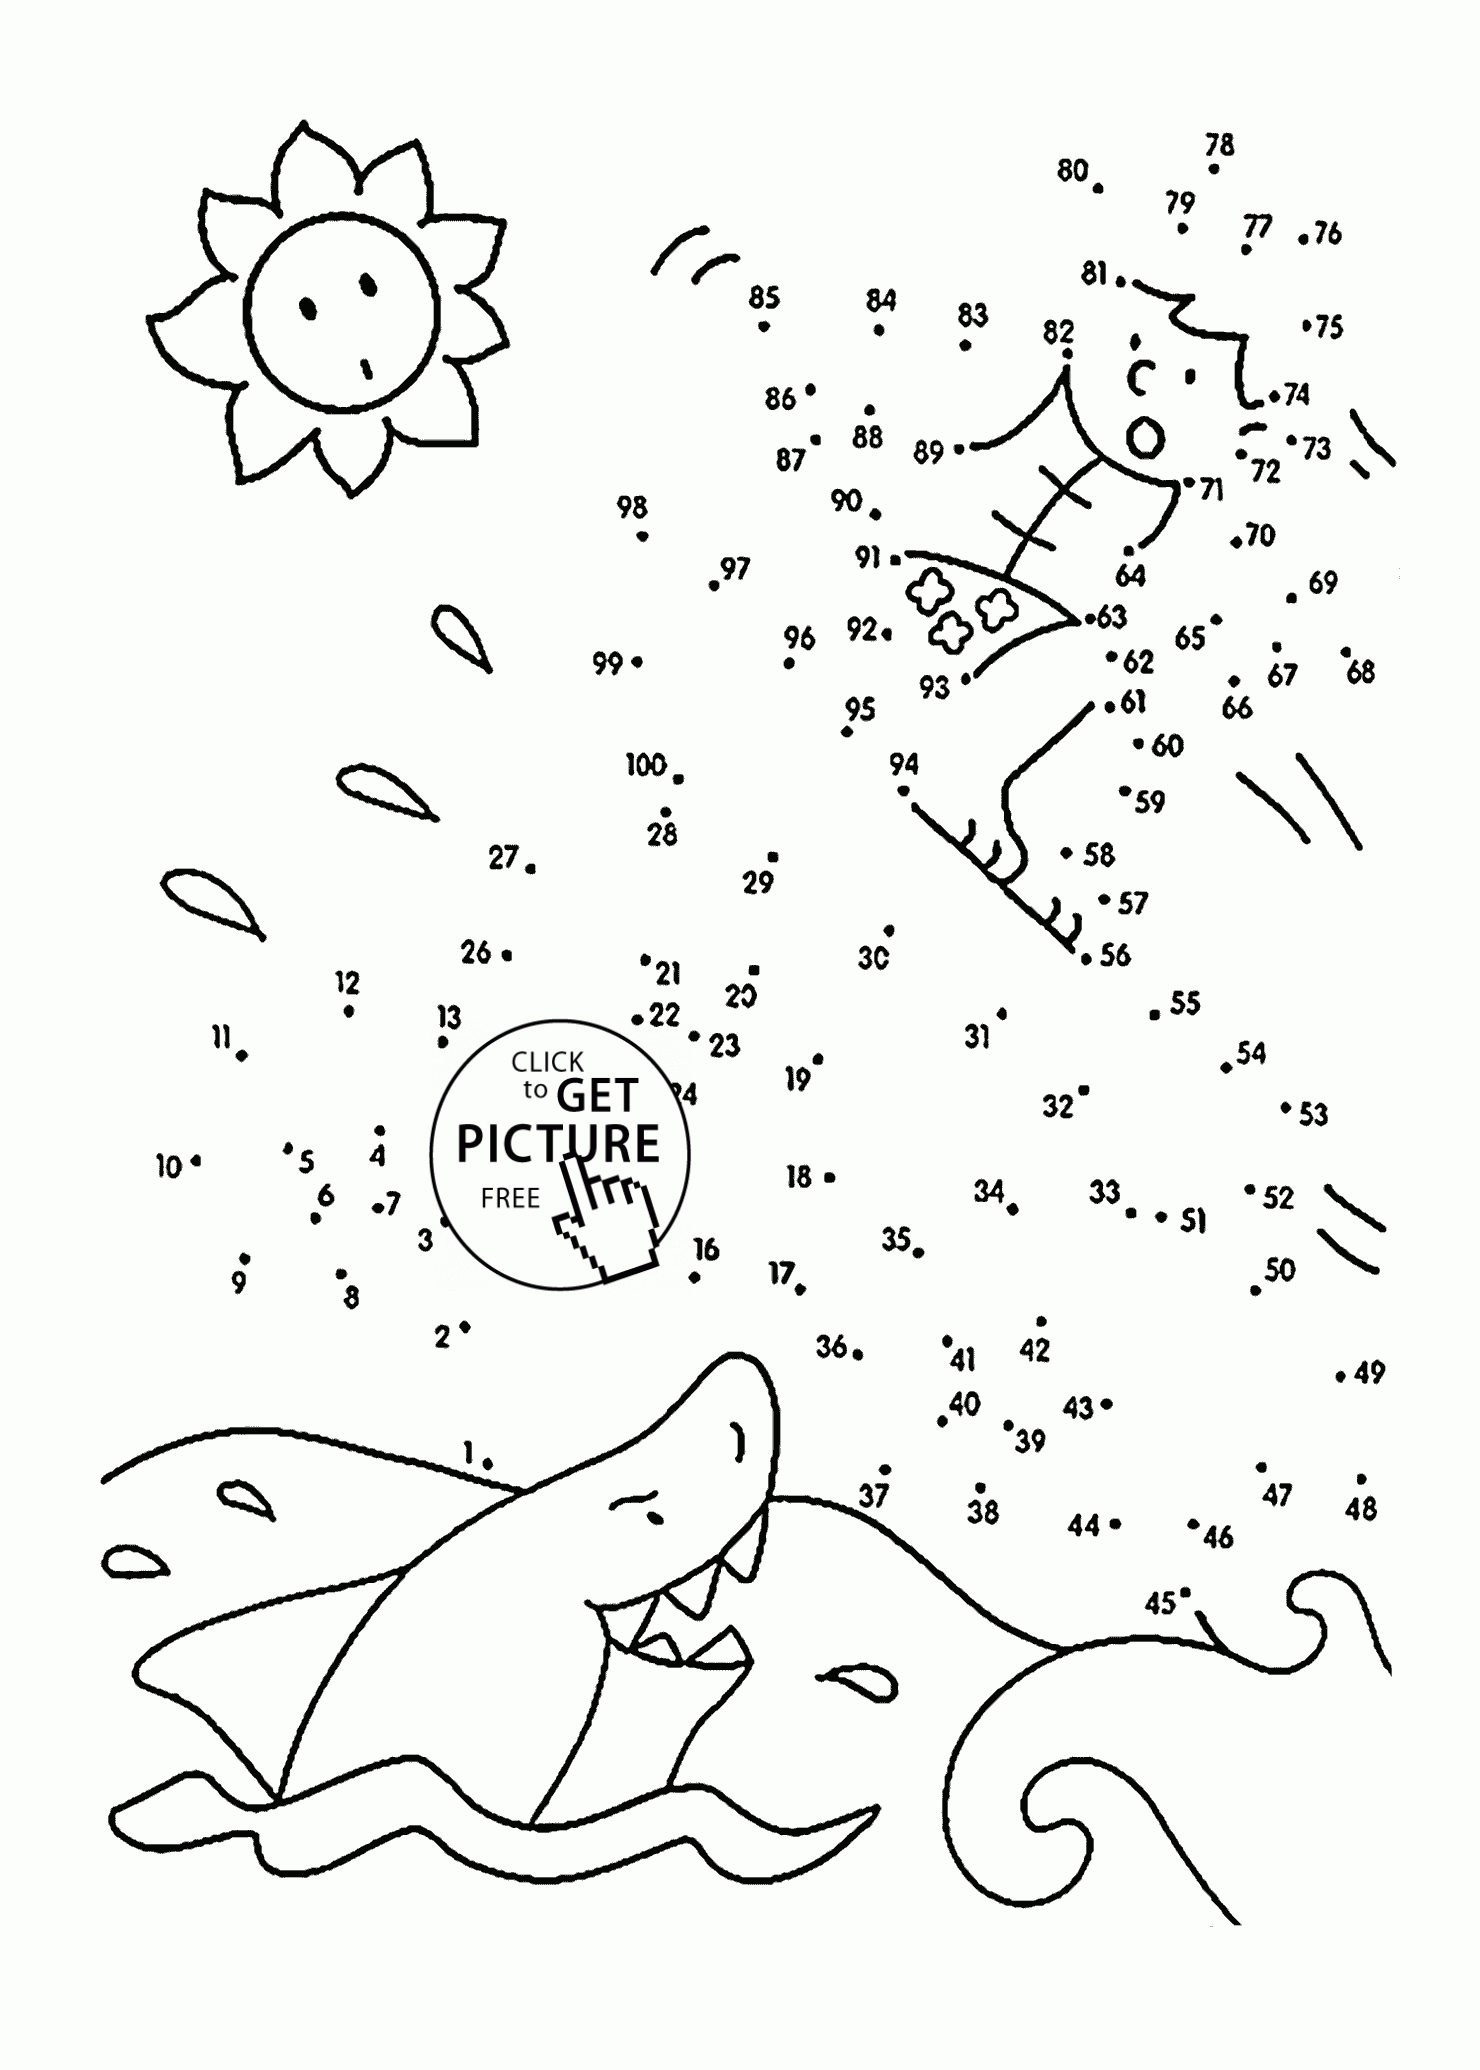 Surfer And Shark Dot To Dot Coloring Pages For Kids Connect The Dots 